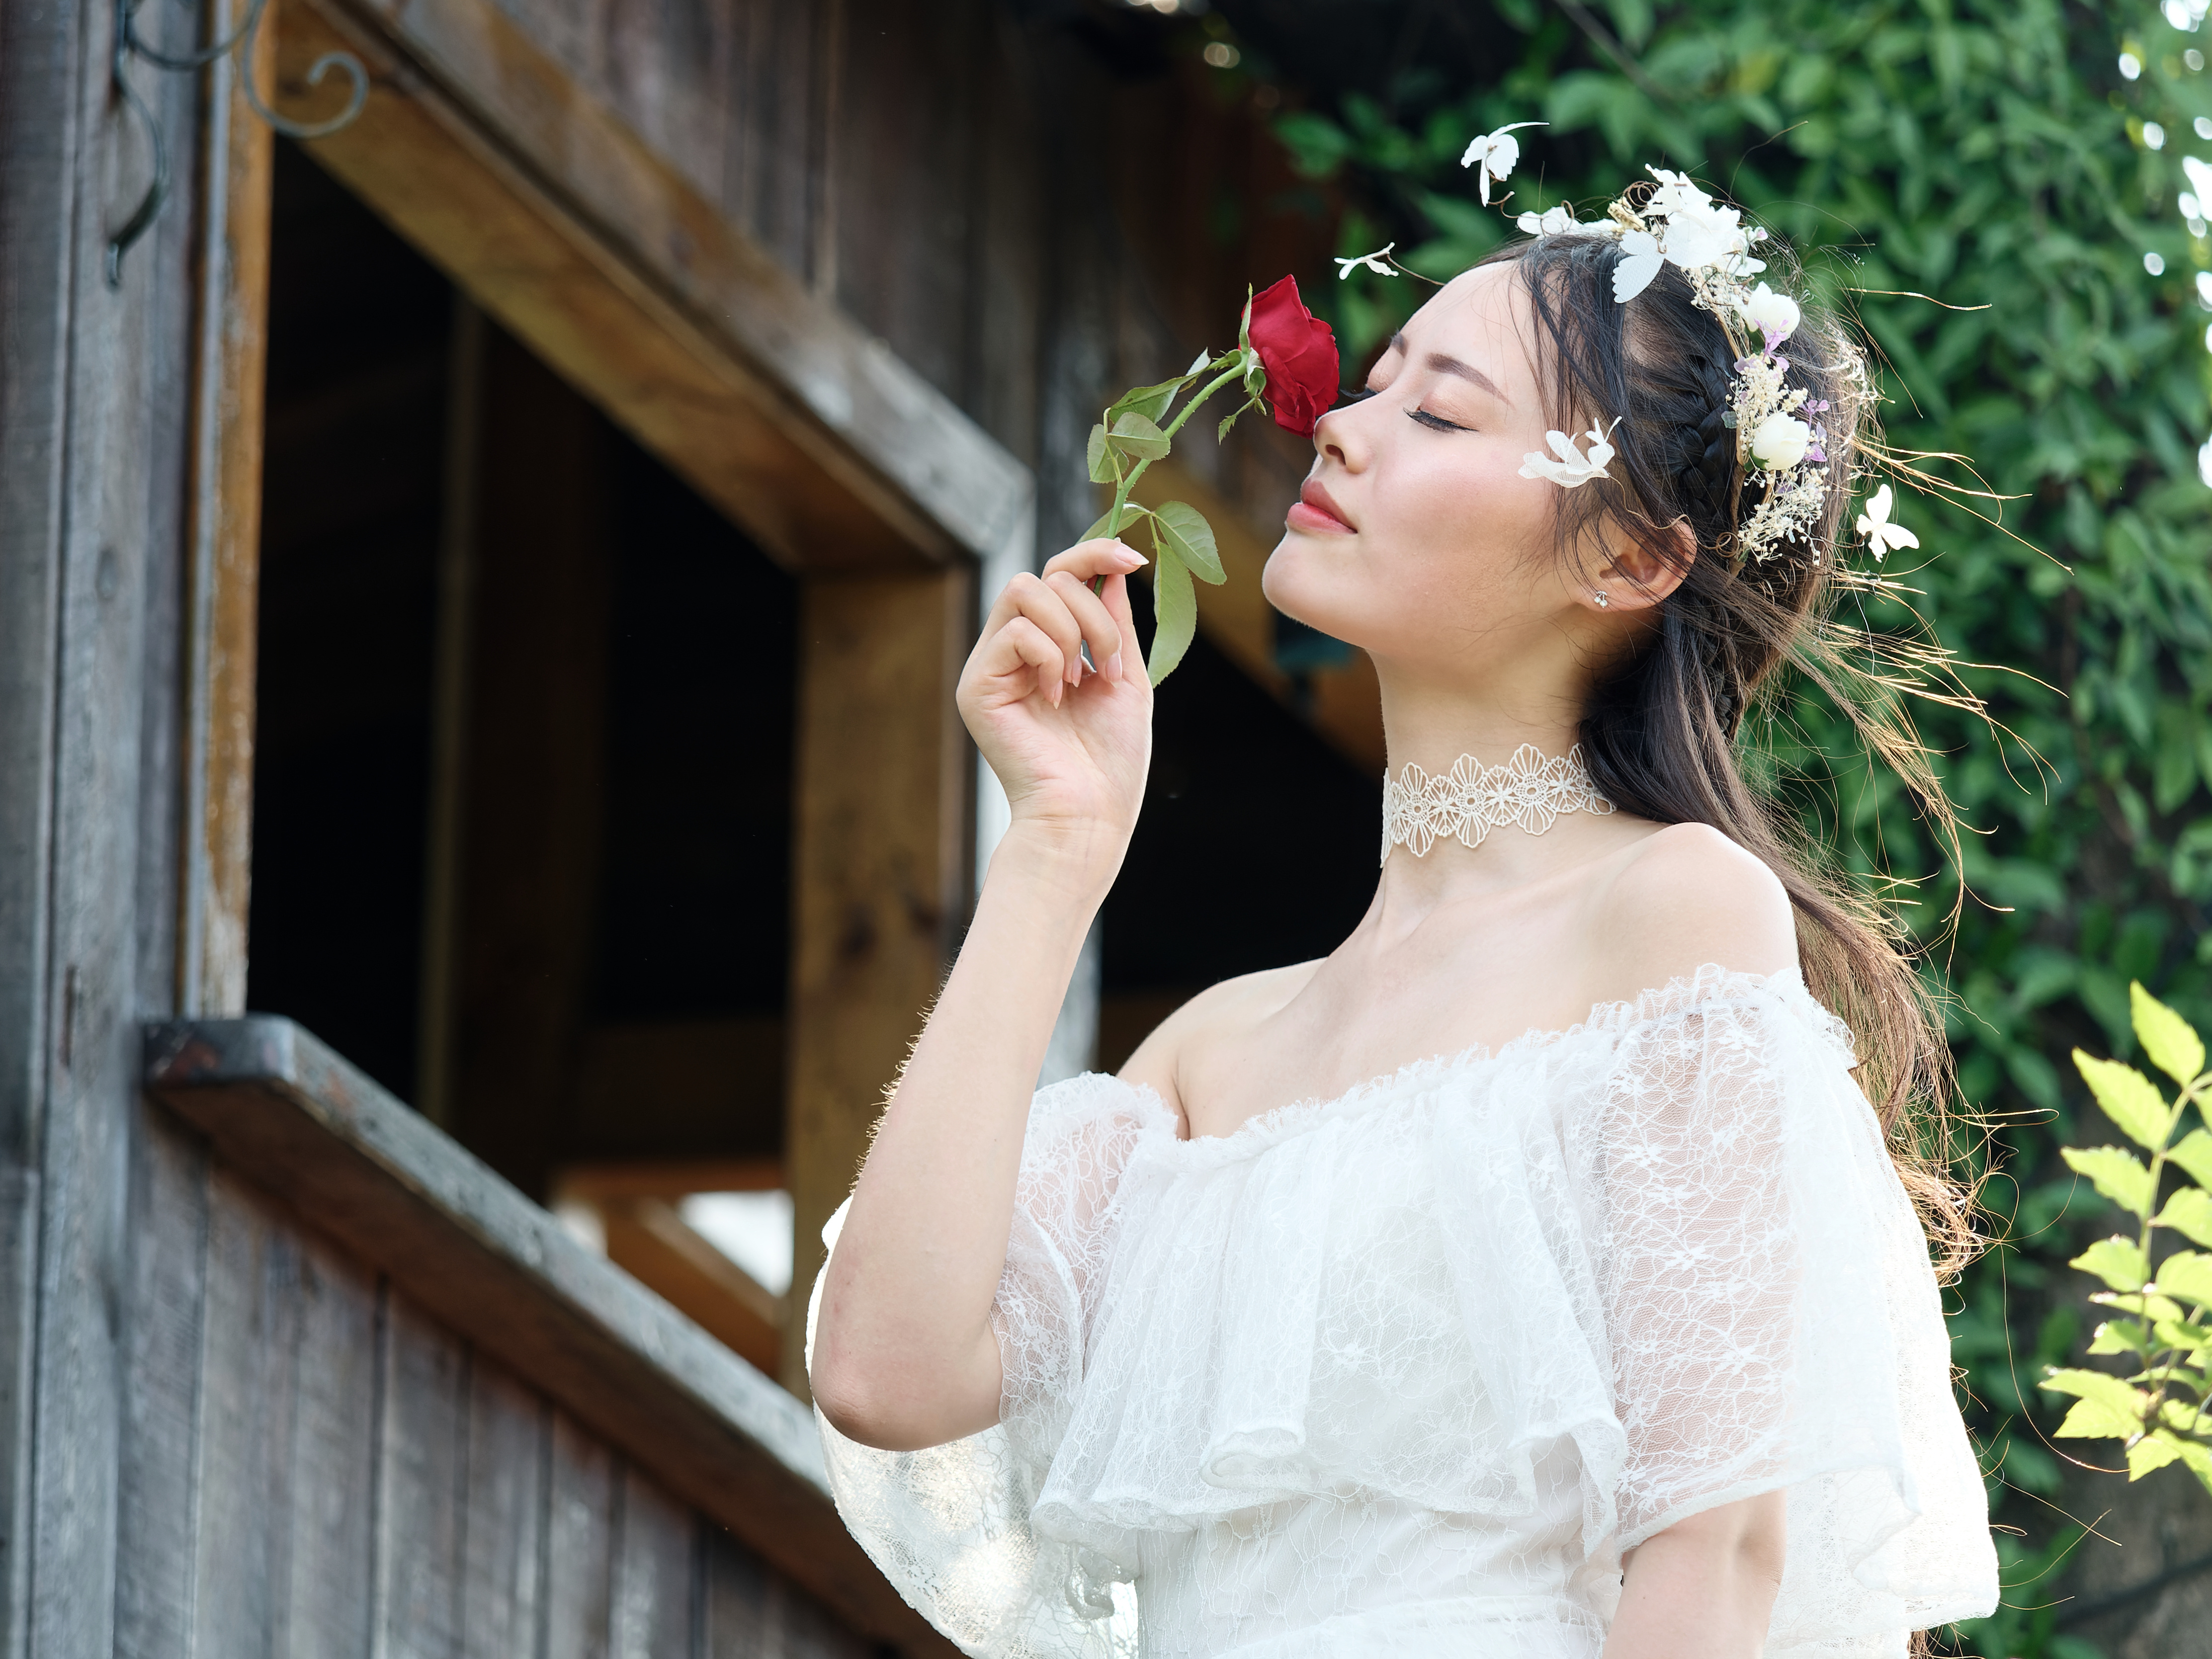 Beautiful young lady in white dress, eyes closed holding a rose to her face